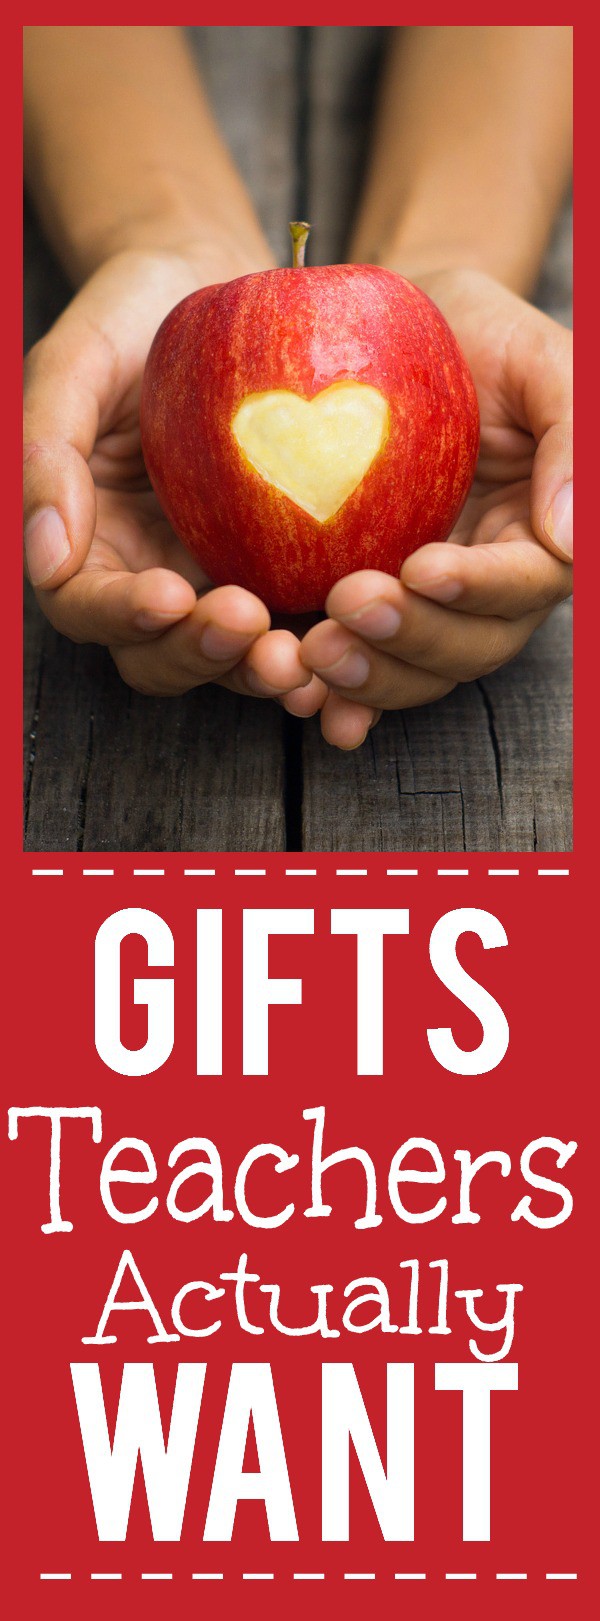 Gift Ideas for Teachers that they'll actually want!  Show your child's teacher they are truly valued and appreciated in a practical way that they'll love with these ideas for Gifts Teachers Actually Want. Great for a back to school gift or as an end of the year teacher gift ideas! From a family of teachers!